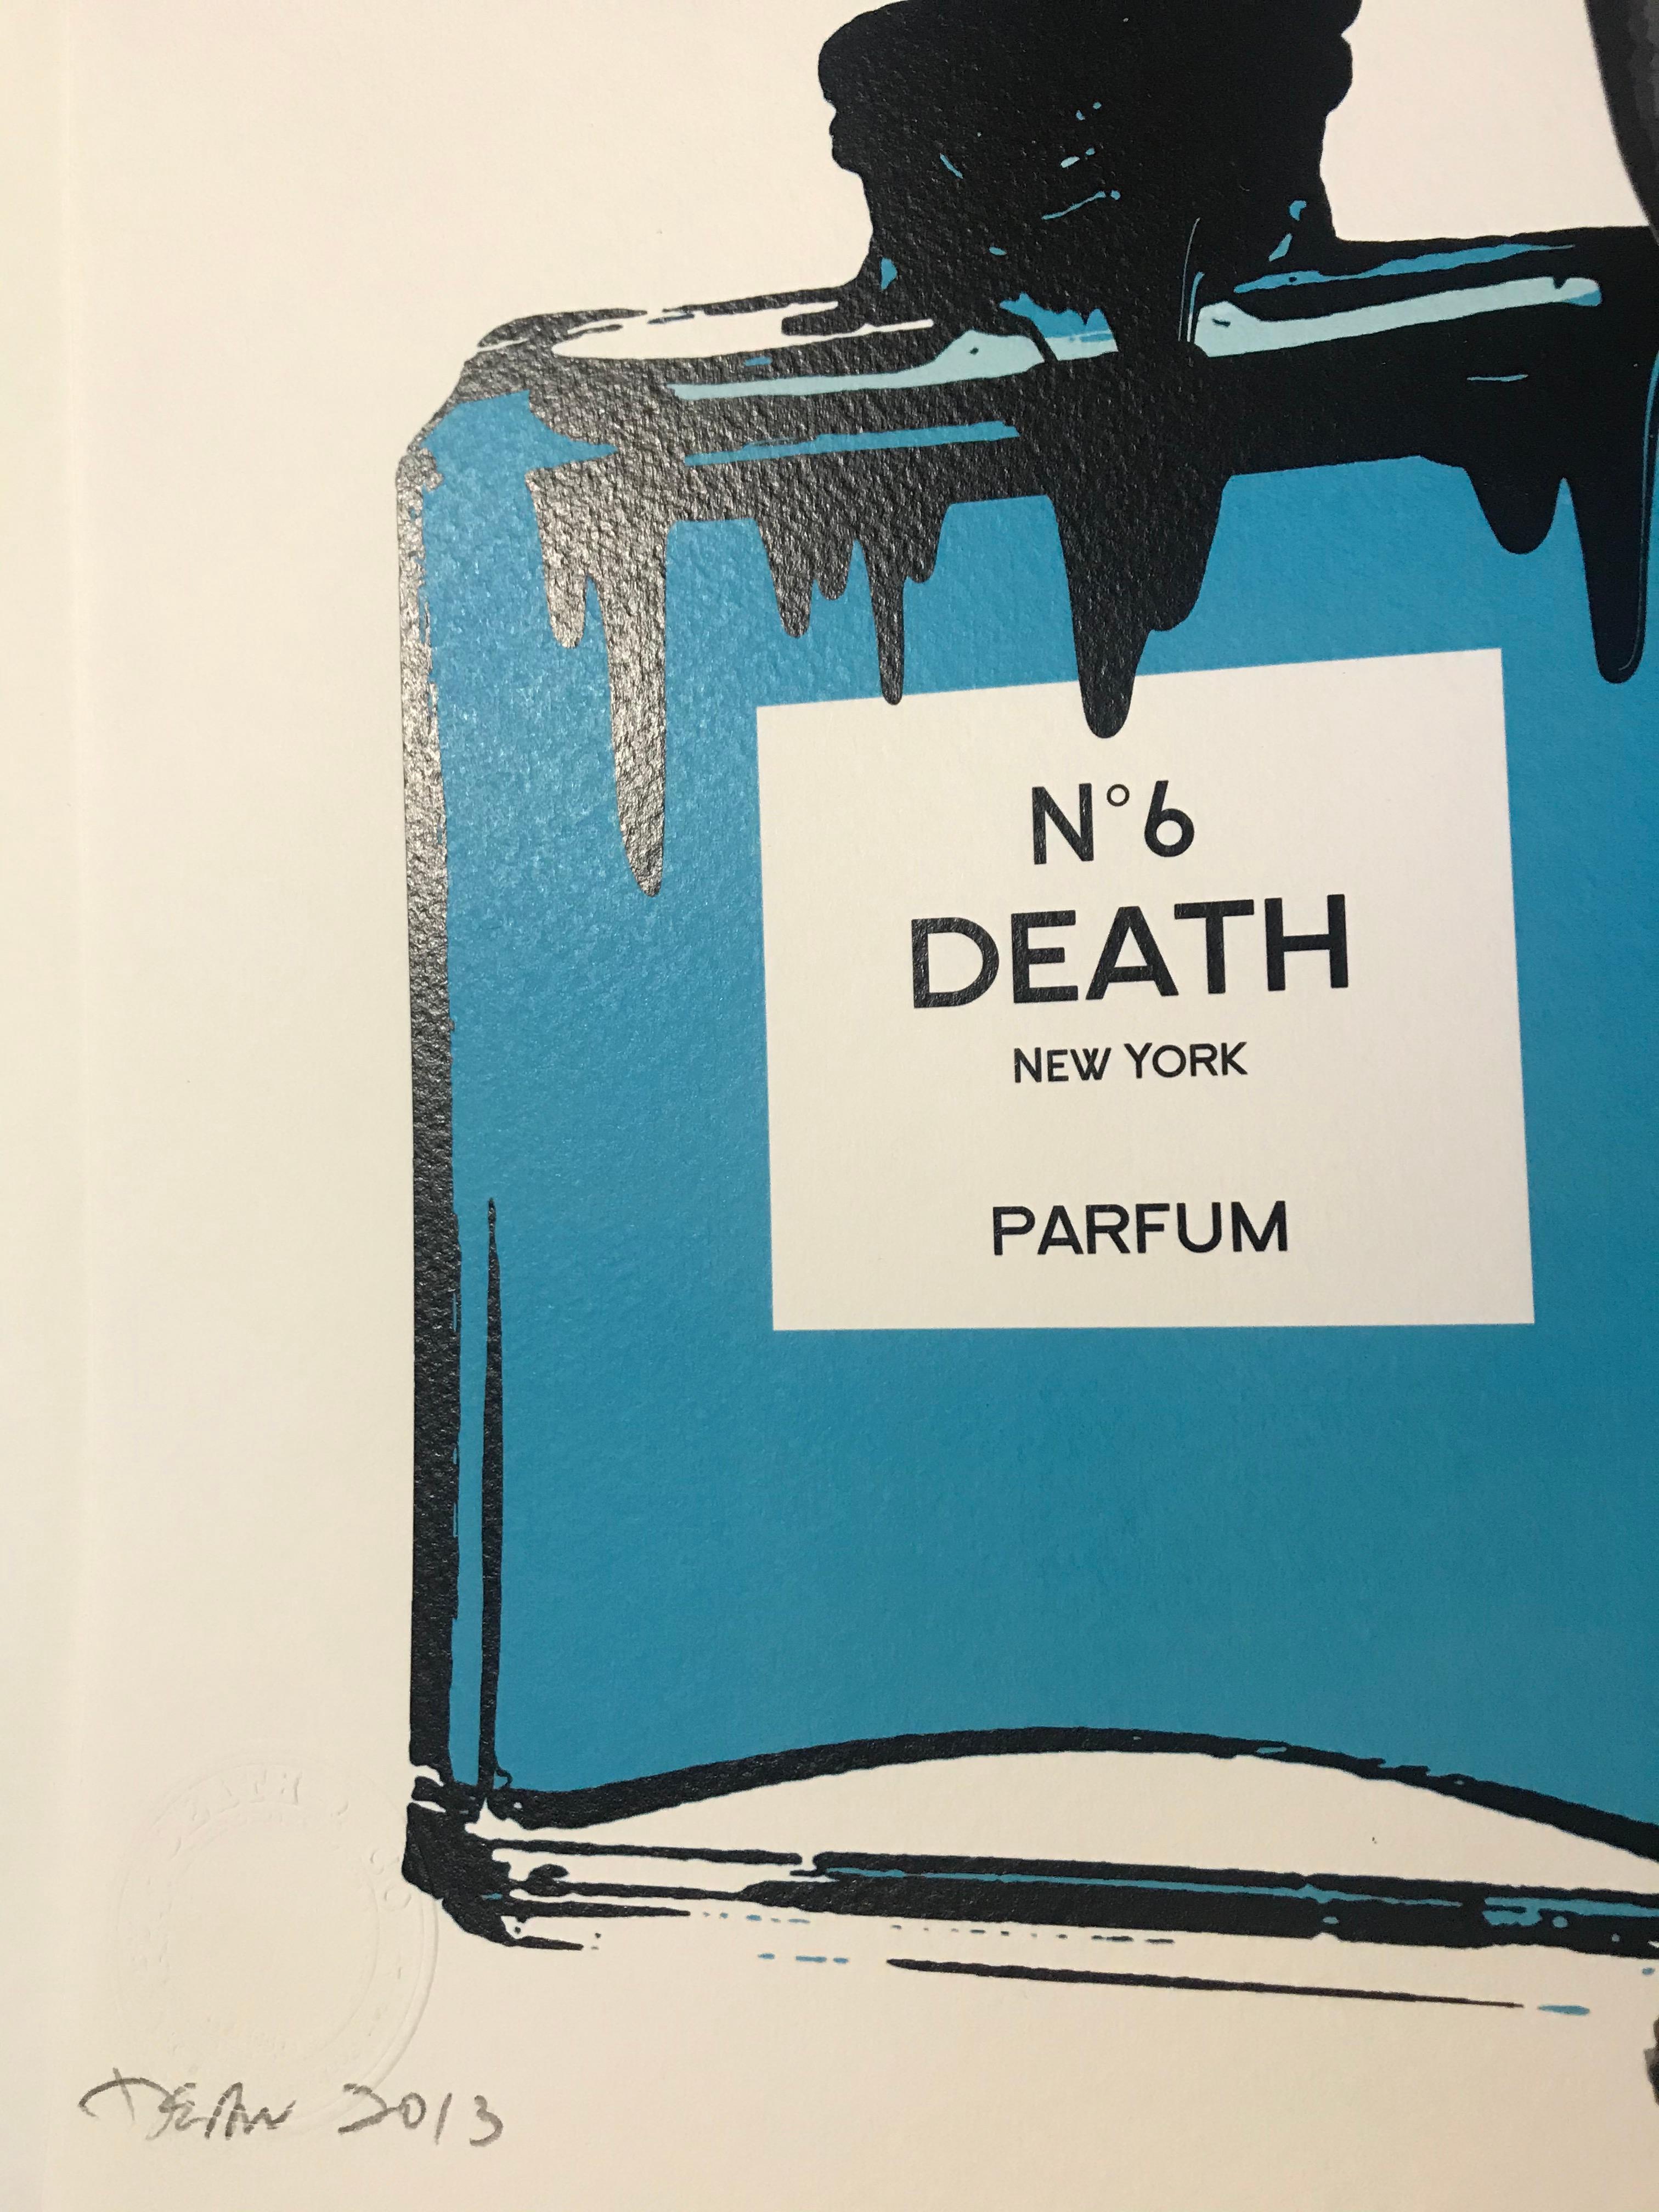 Death NYC
Marilyn No6 death Chanel
Signed and justified screen print AP ( artist proof ) in pencil 
dated 2013
Dry seal 
2 certificates 
129 euros